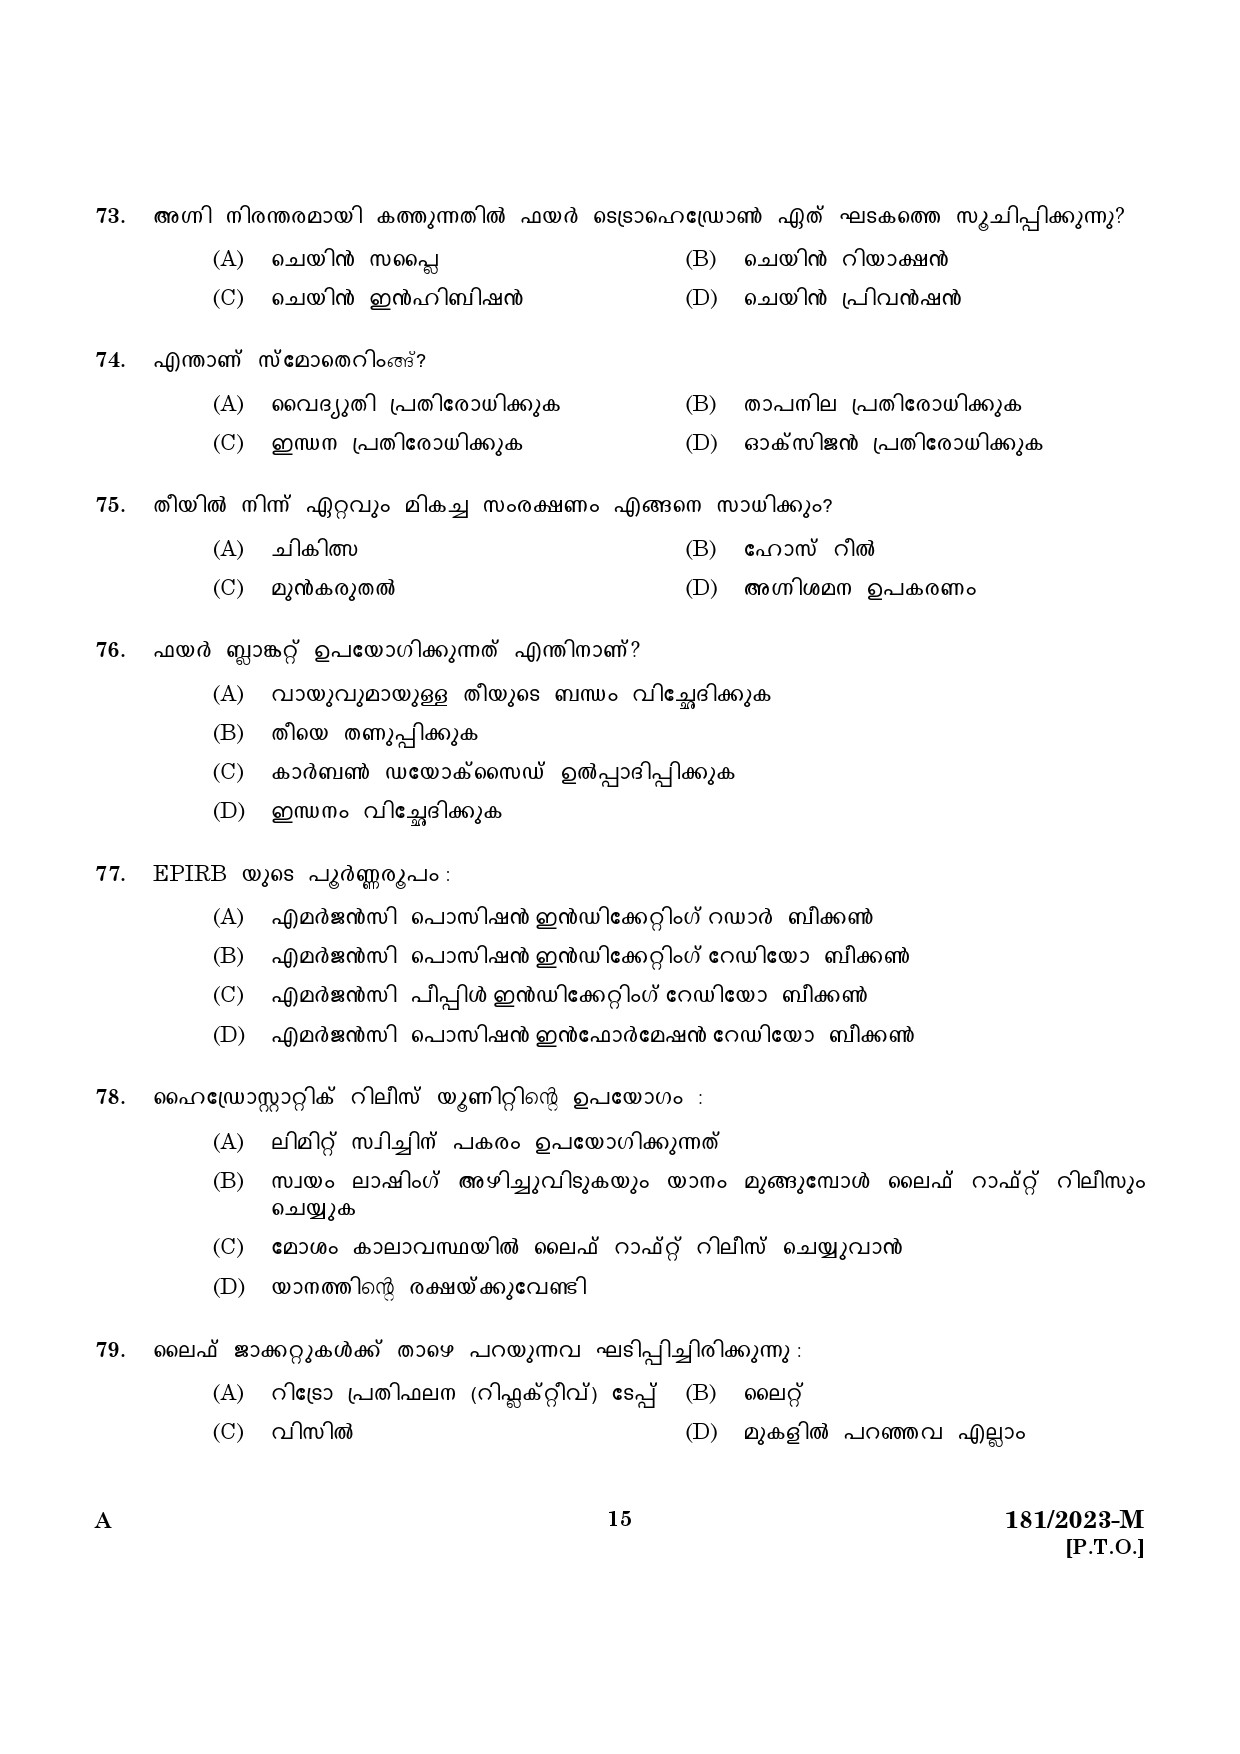 KPSC Forest Boat Driver Malayalam Exam 2023 Code 1812023 M 13